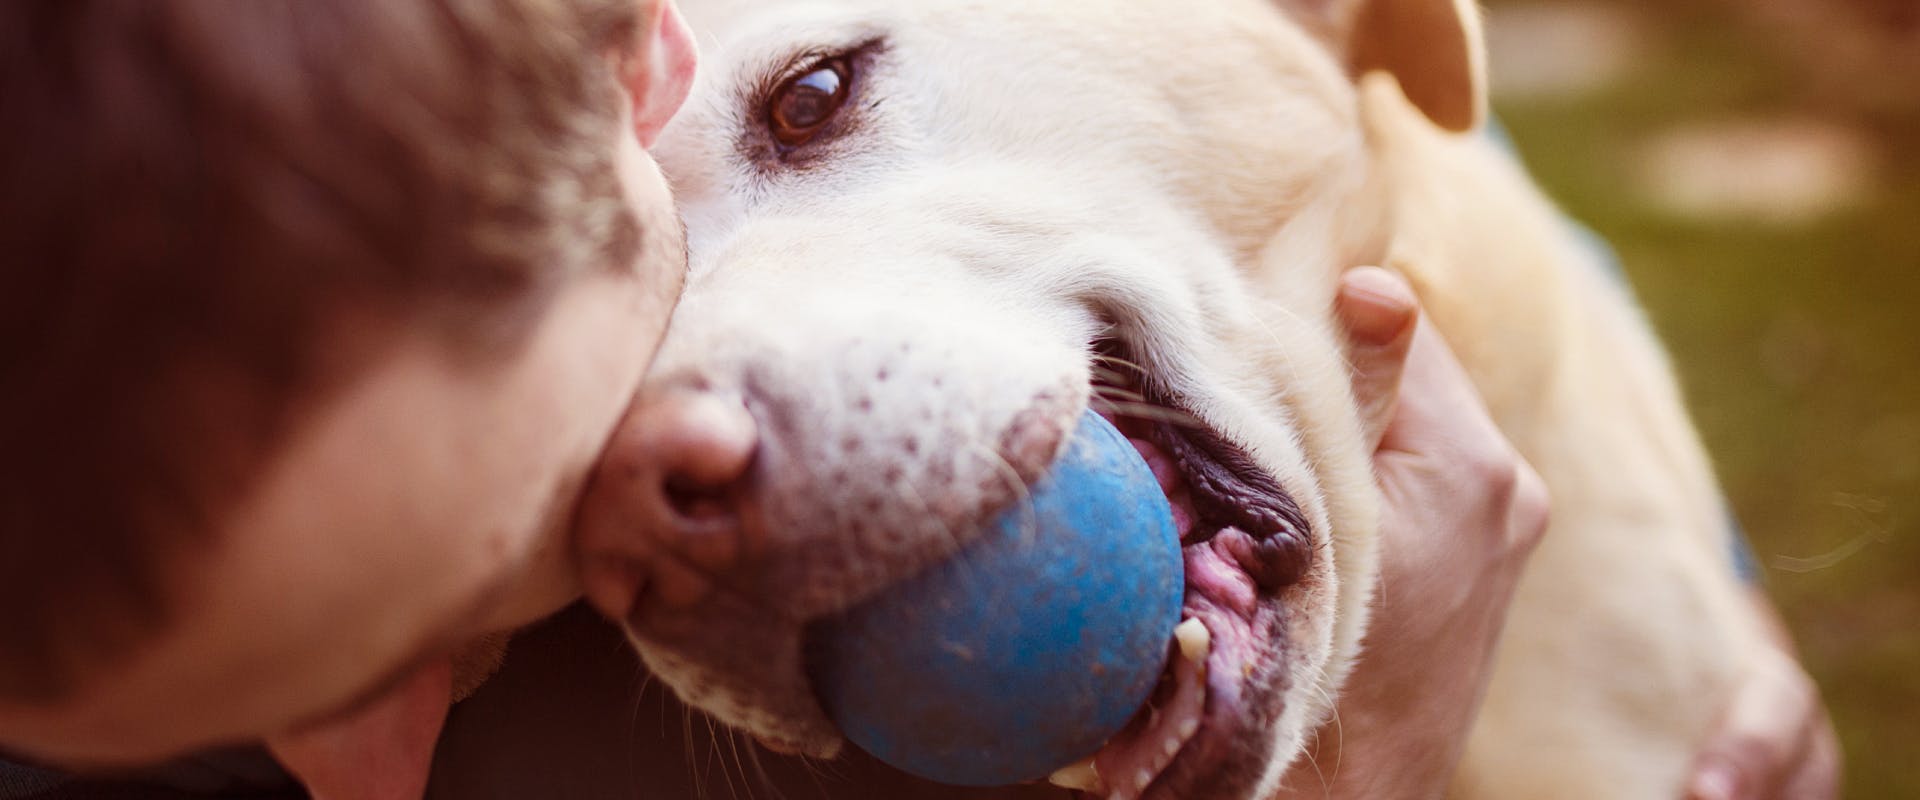 Dog looking at a man with a ball in its mouth.